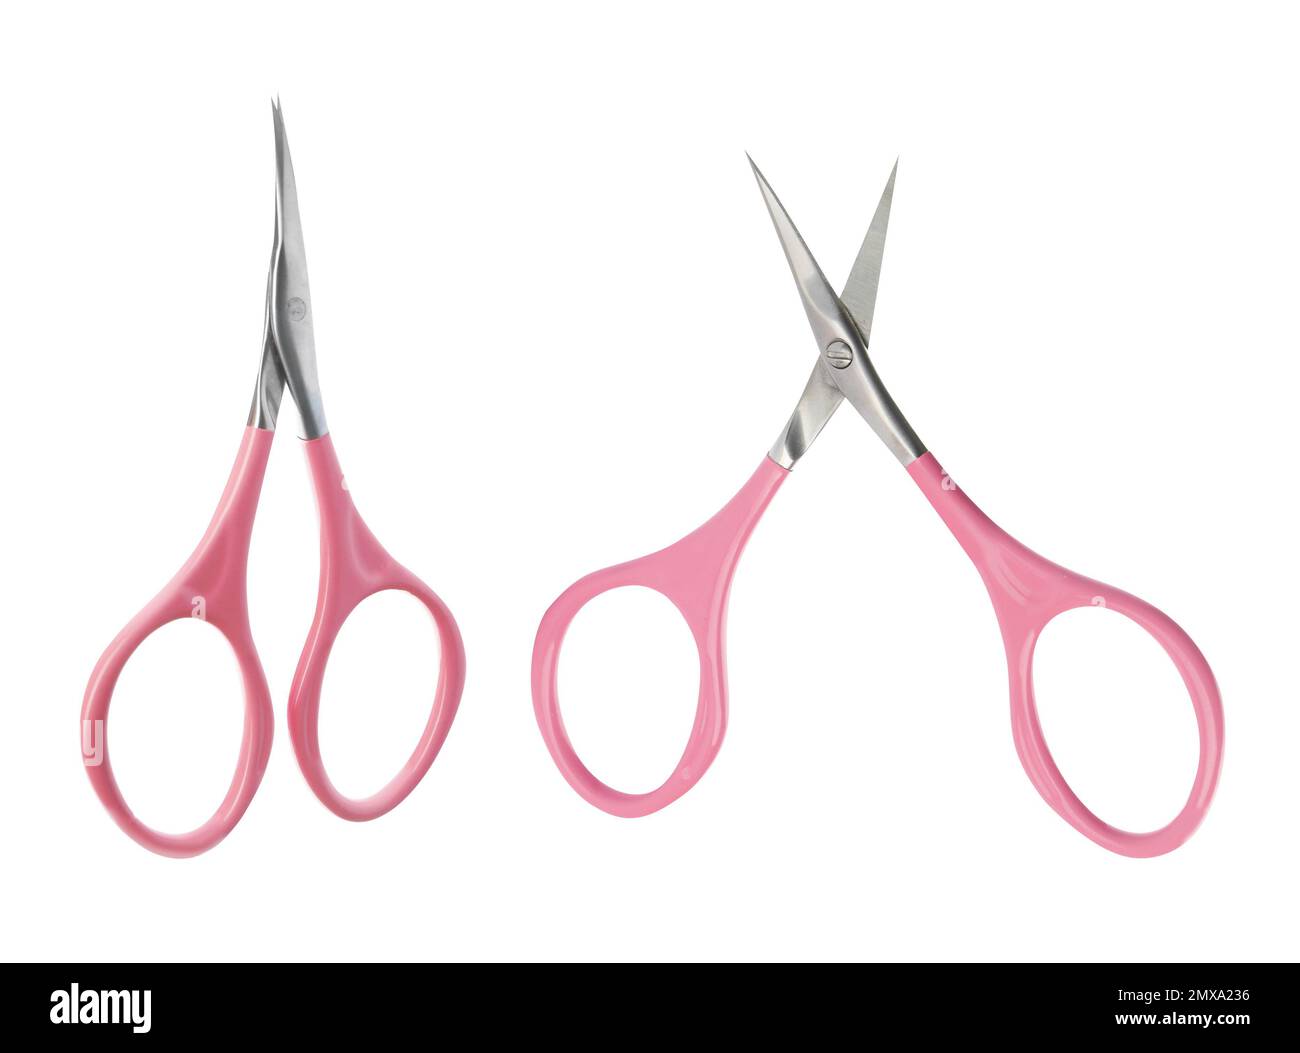 Sharp manicure scissors on white background, top view Stock Photo